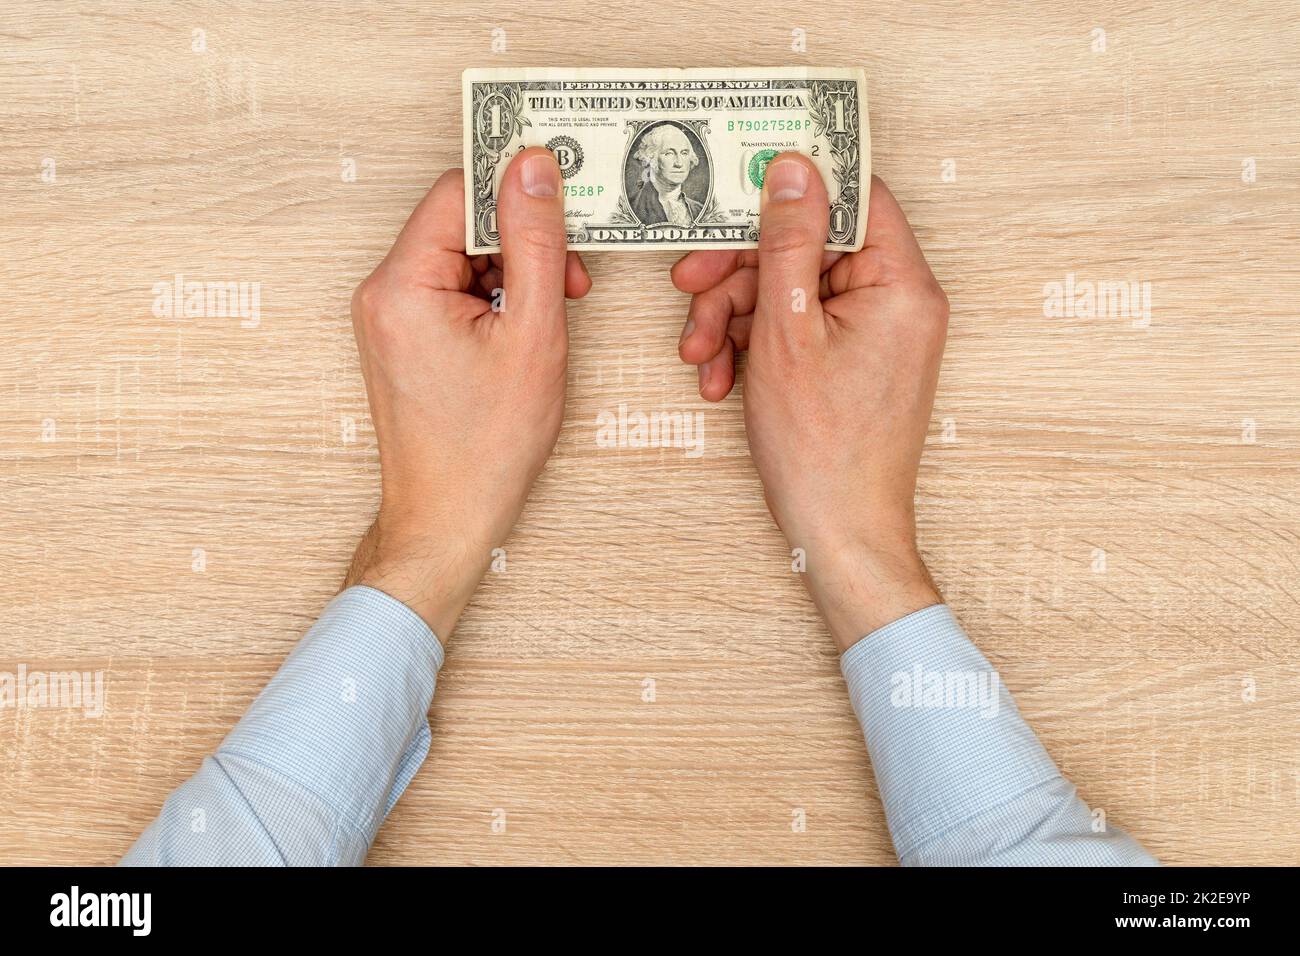 One dollar banknote in male hands Stock Photo